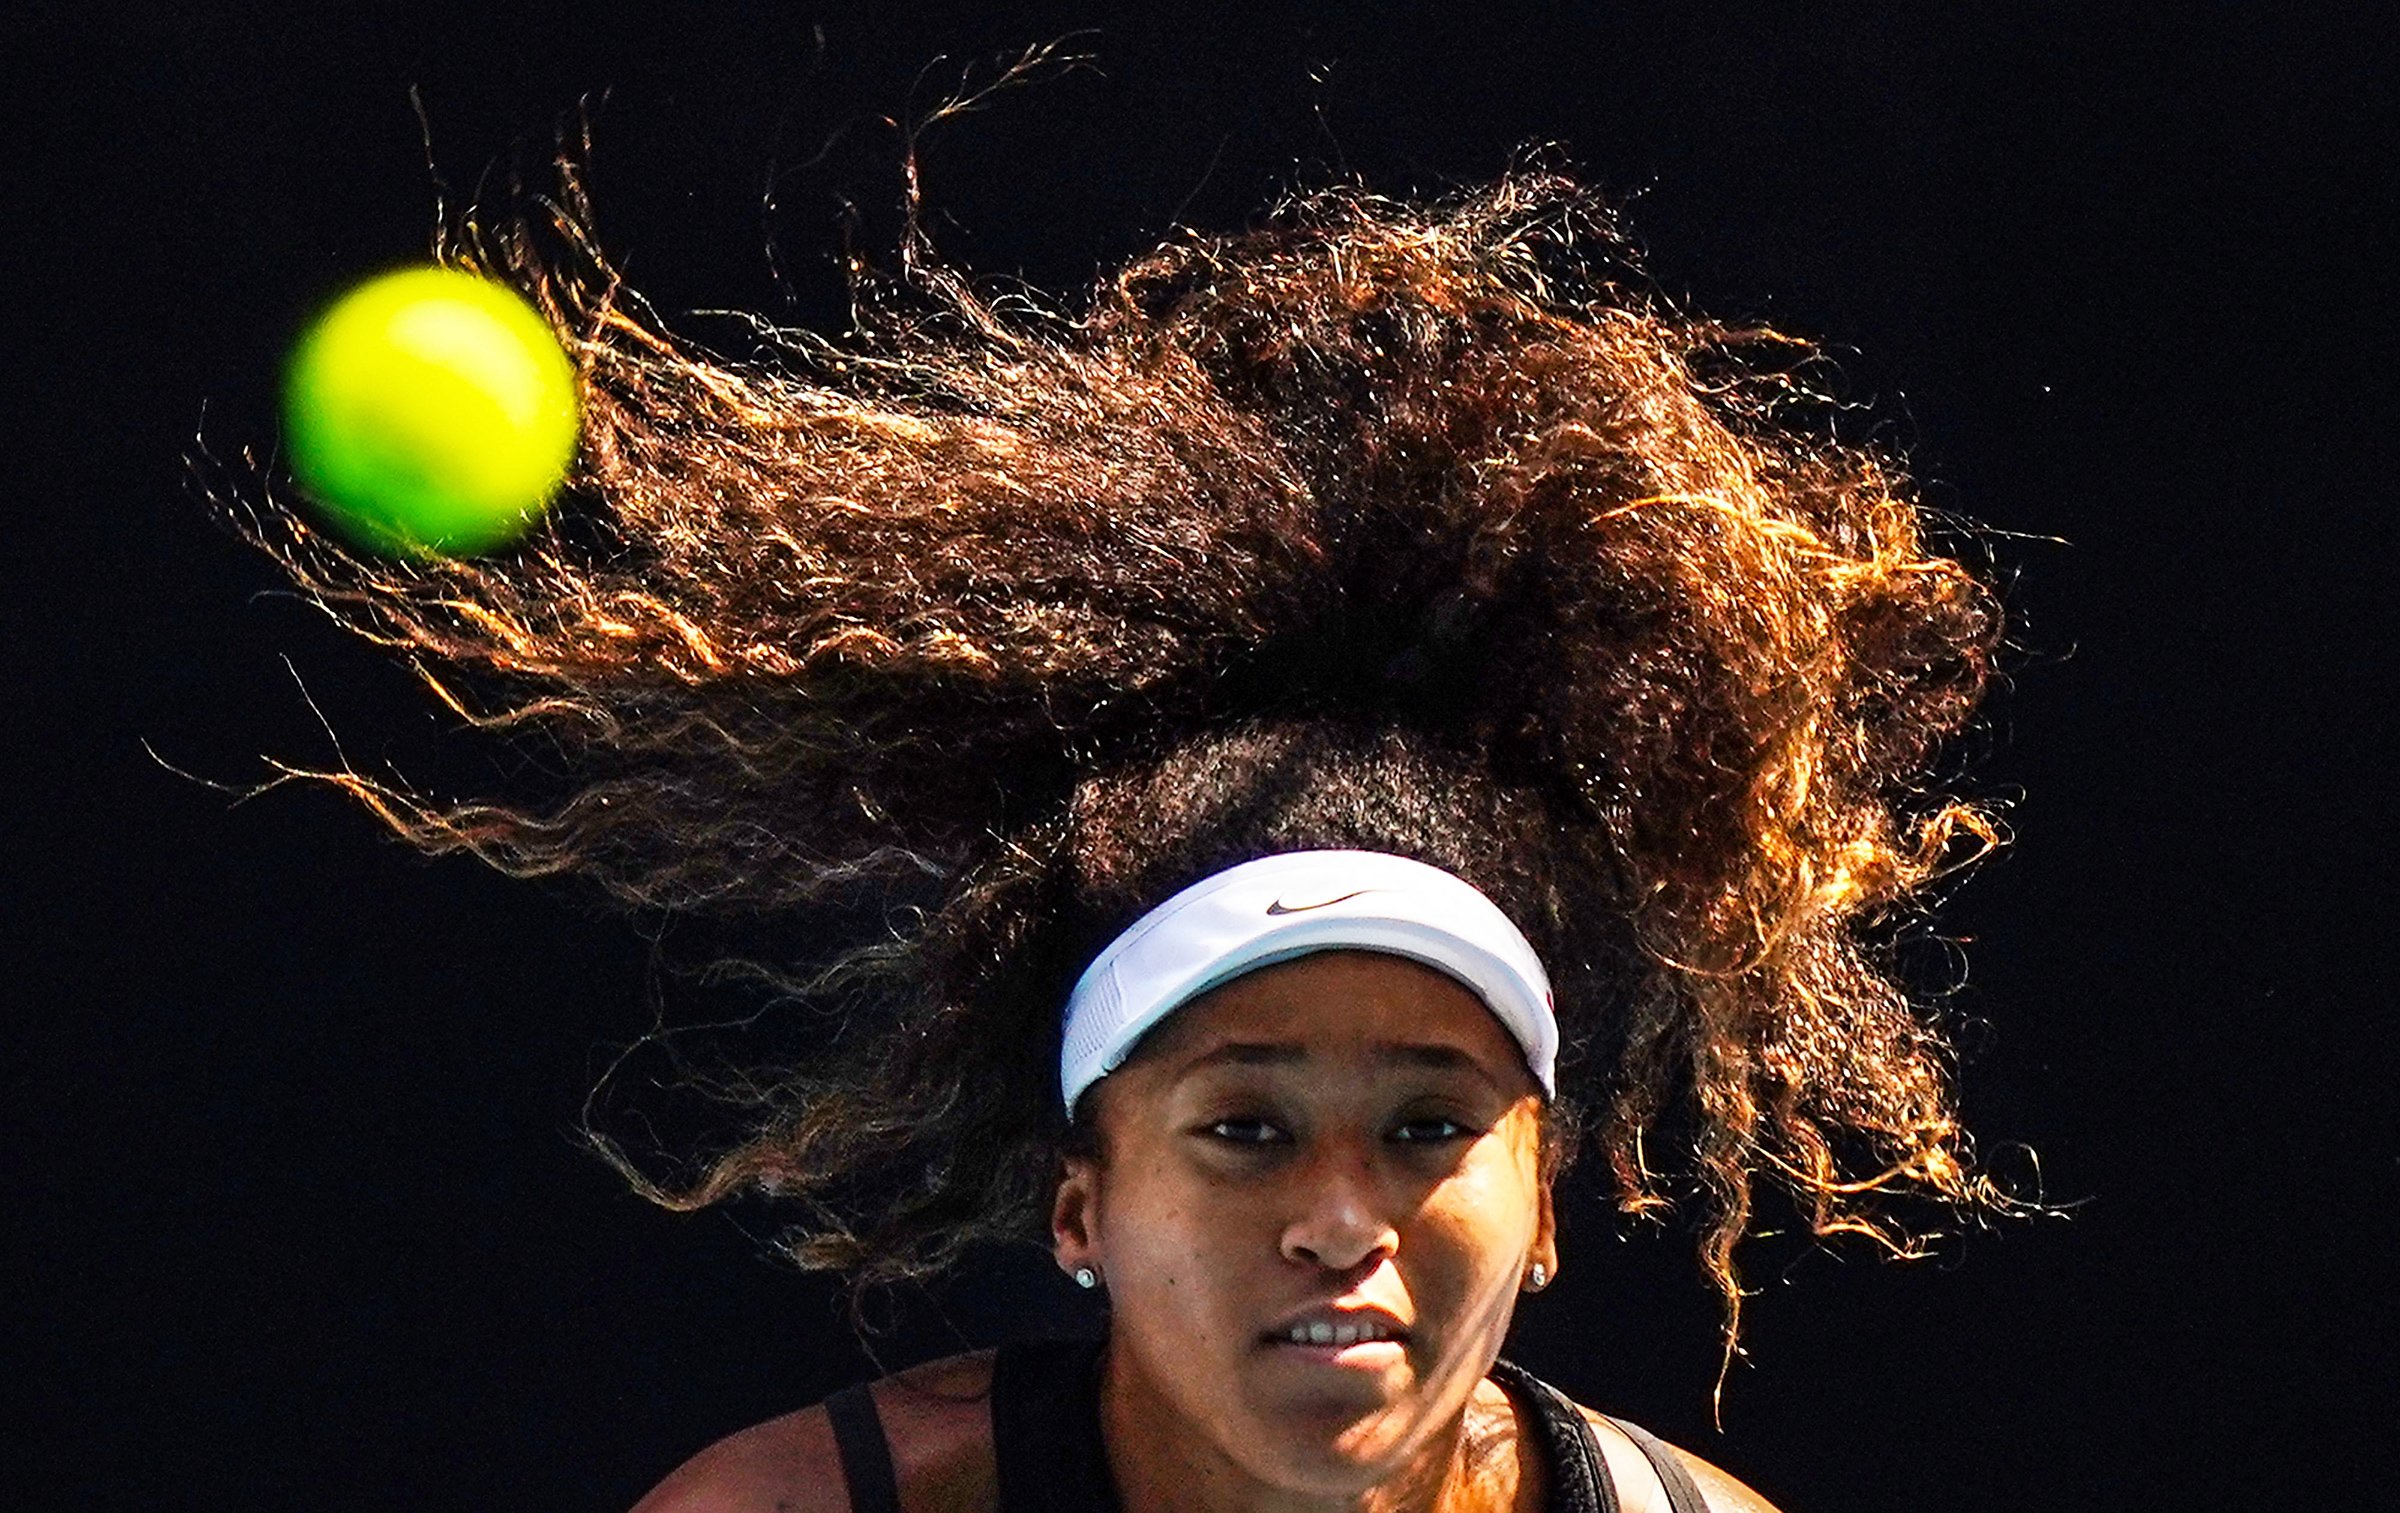 Naomi Osaka of Japan takes part in an Australian Open practice session in Melbourne on Jan. 18, 2020.